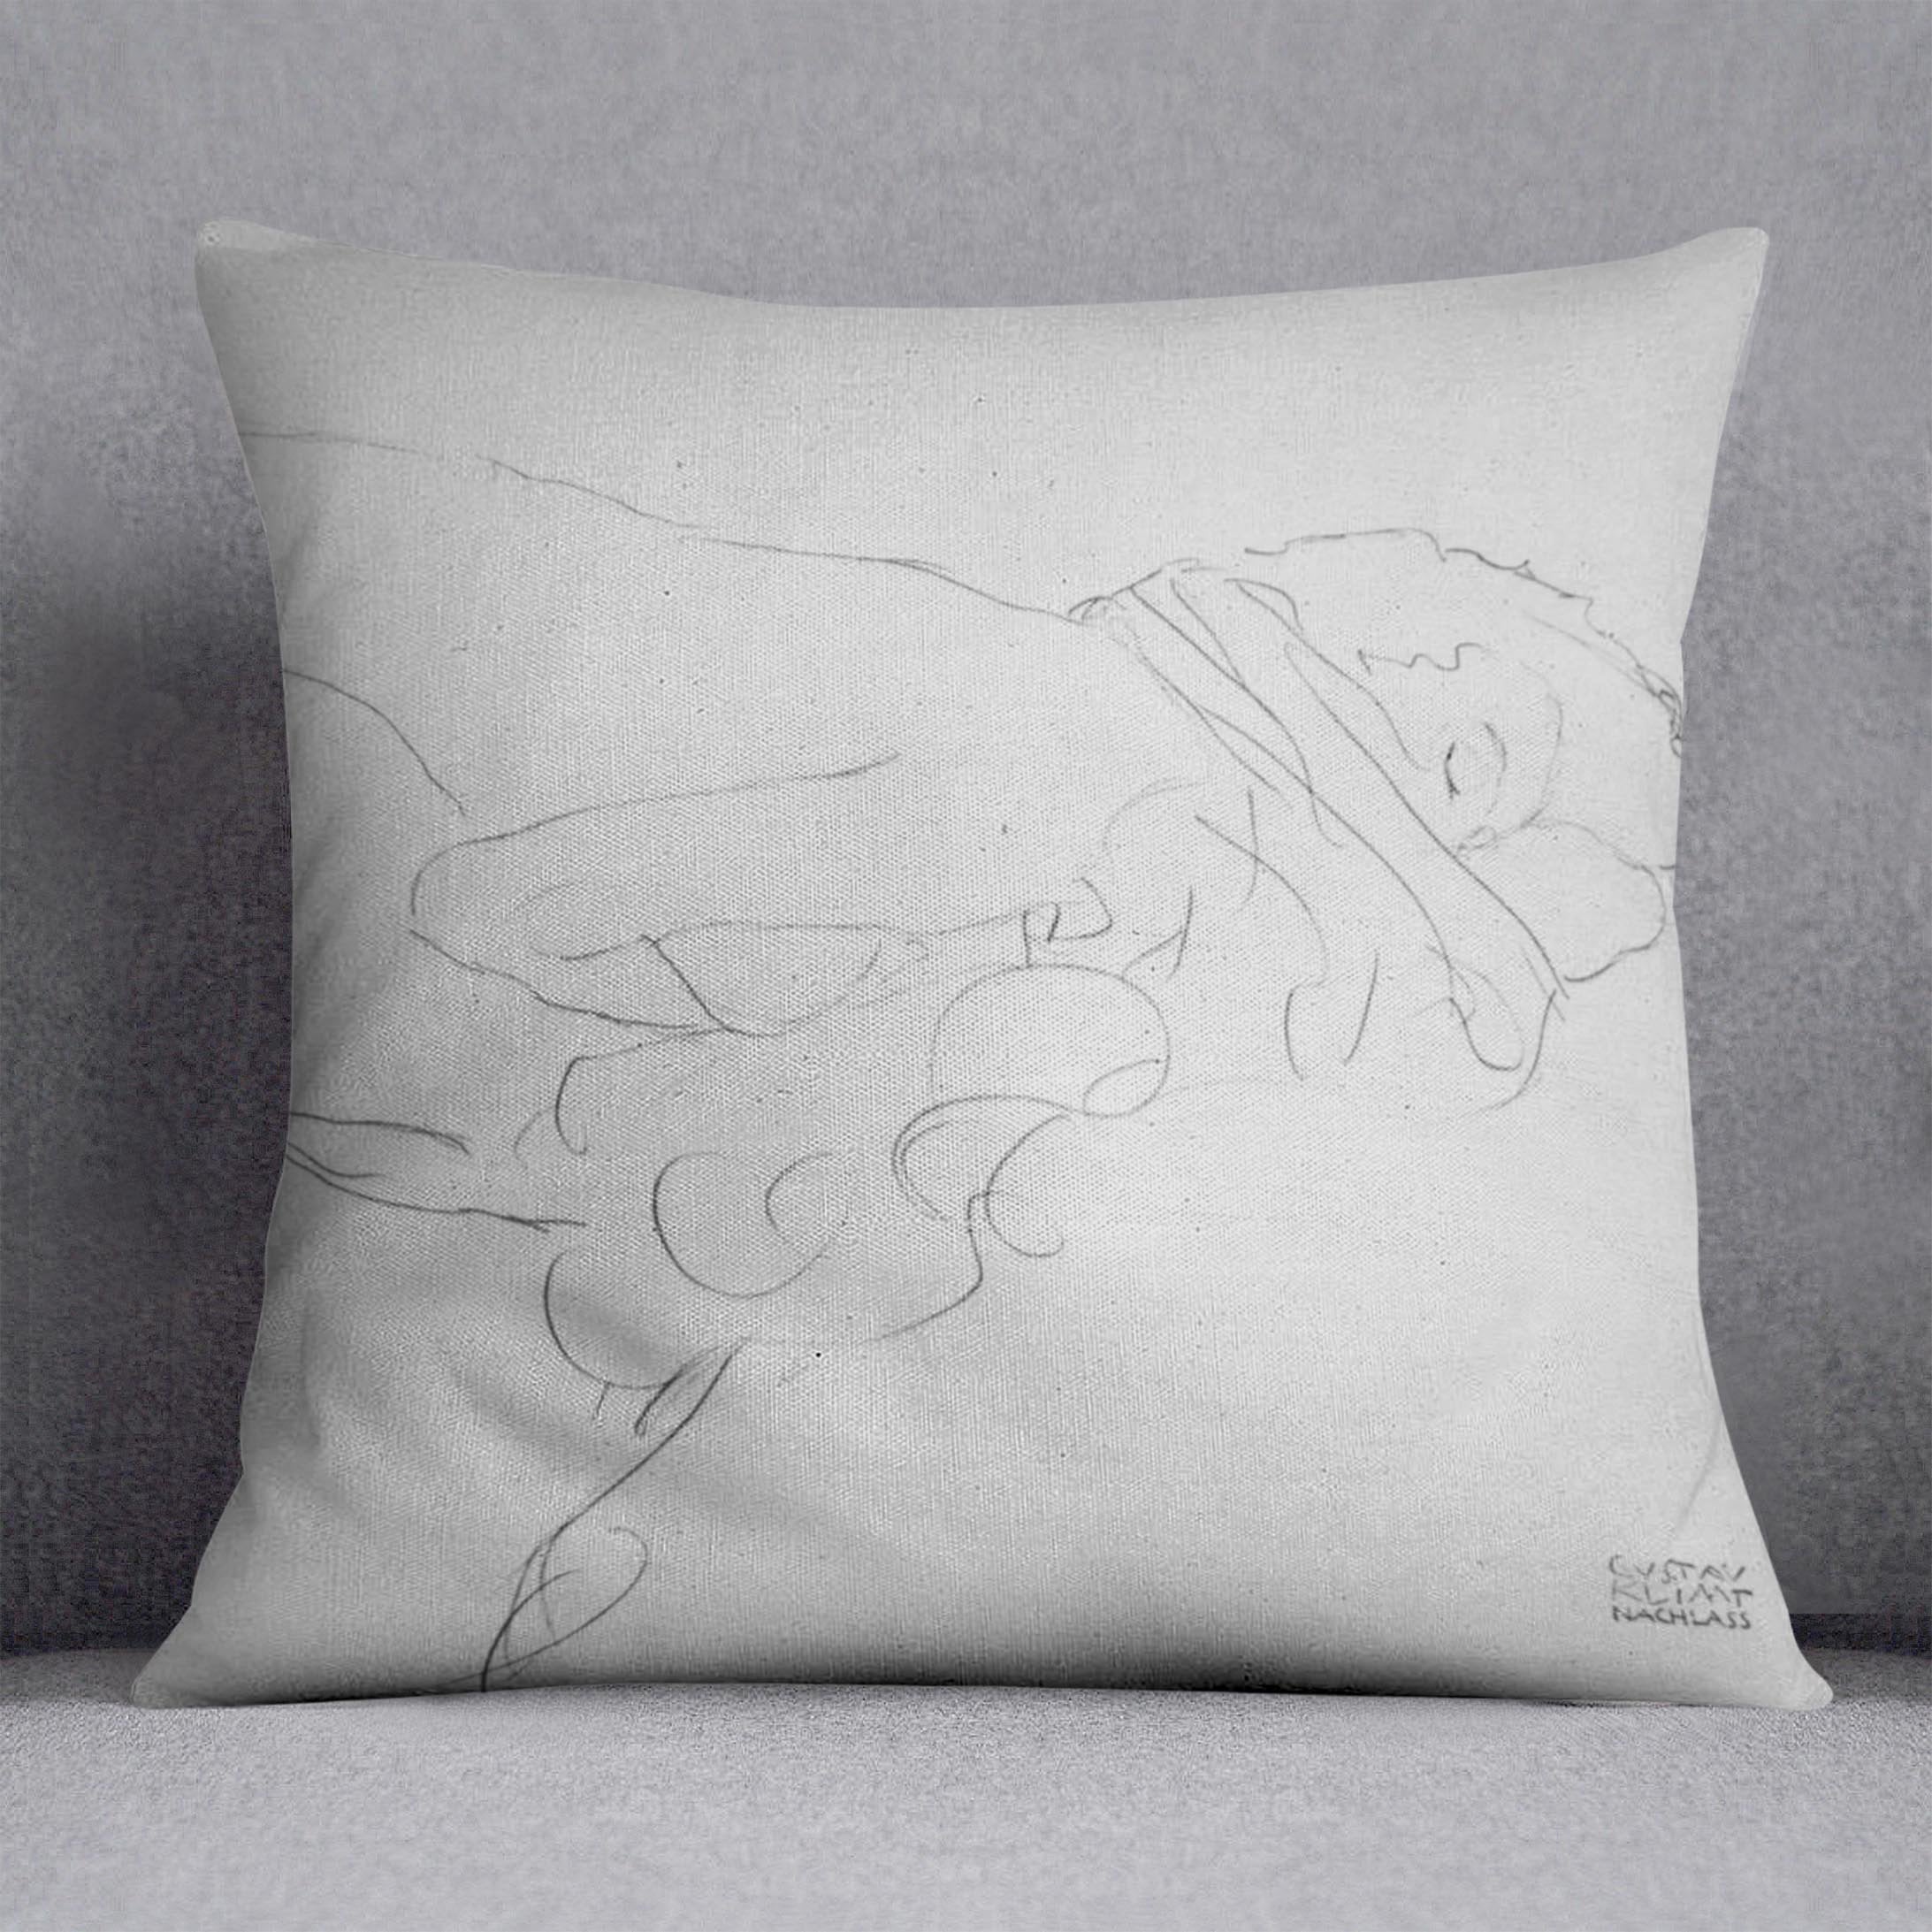 Crouching to right by Klimt Throw Pillow